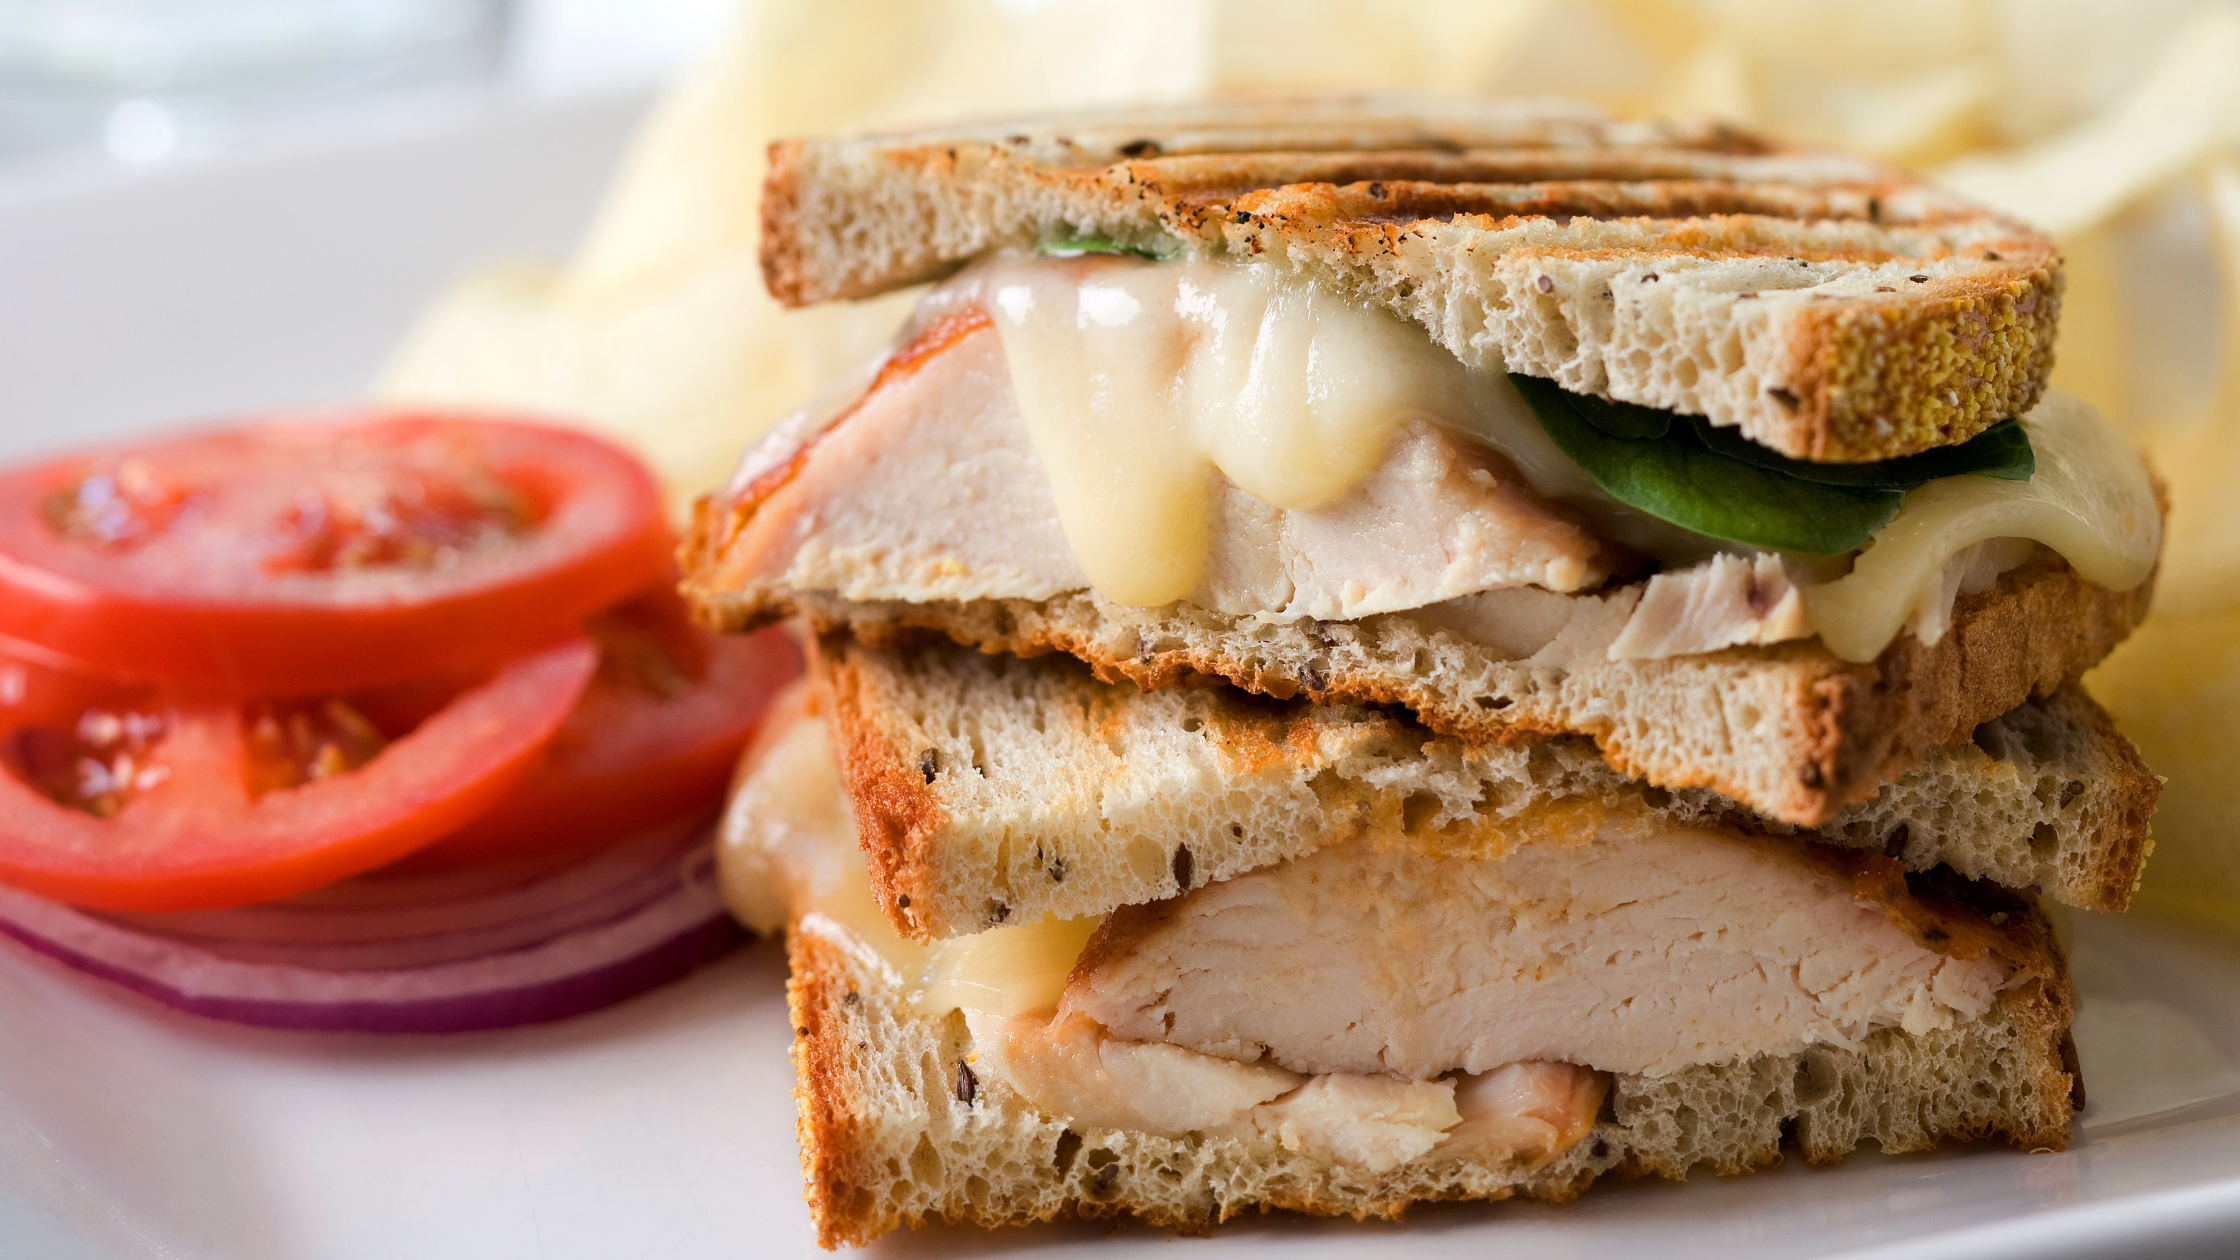 Flavorful Grilled Chicken & Brie Panini 17